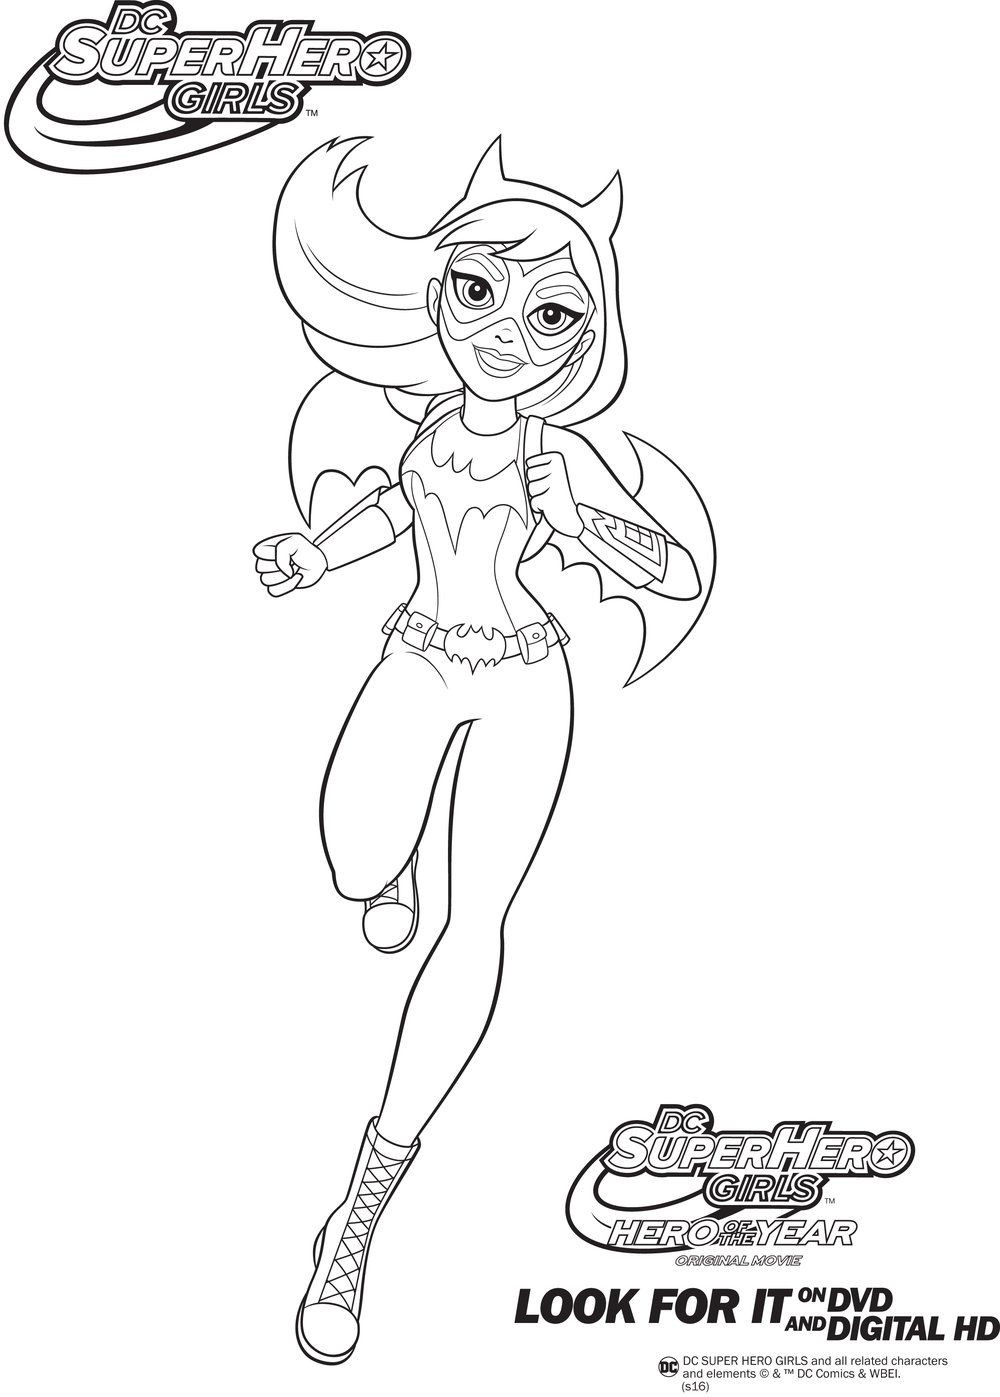 Girl Superhero Coloring Pages Free
 Image result for batgirl super hero girls coloring pages